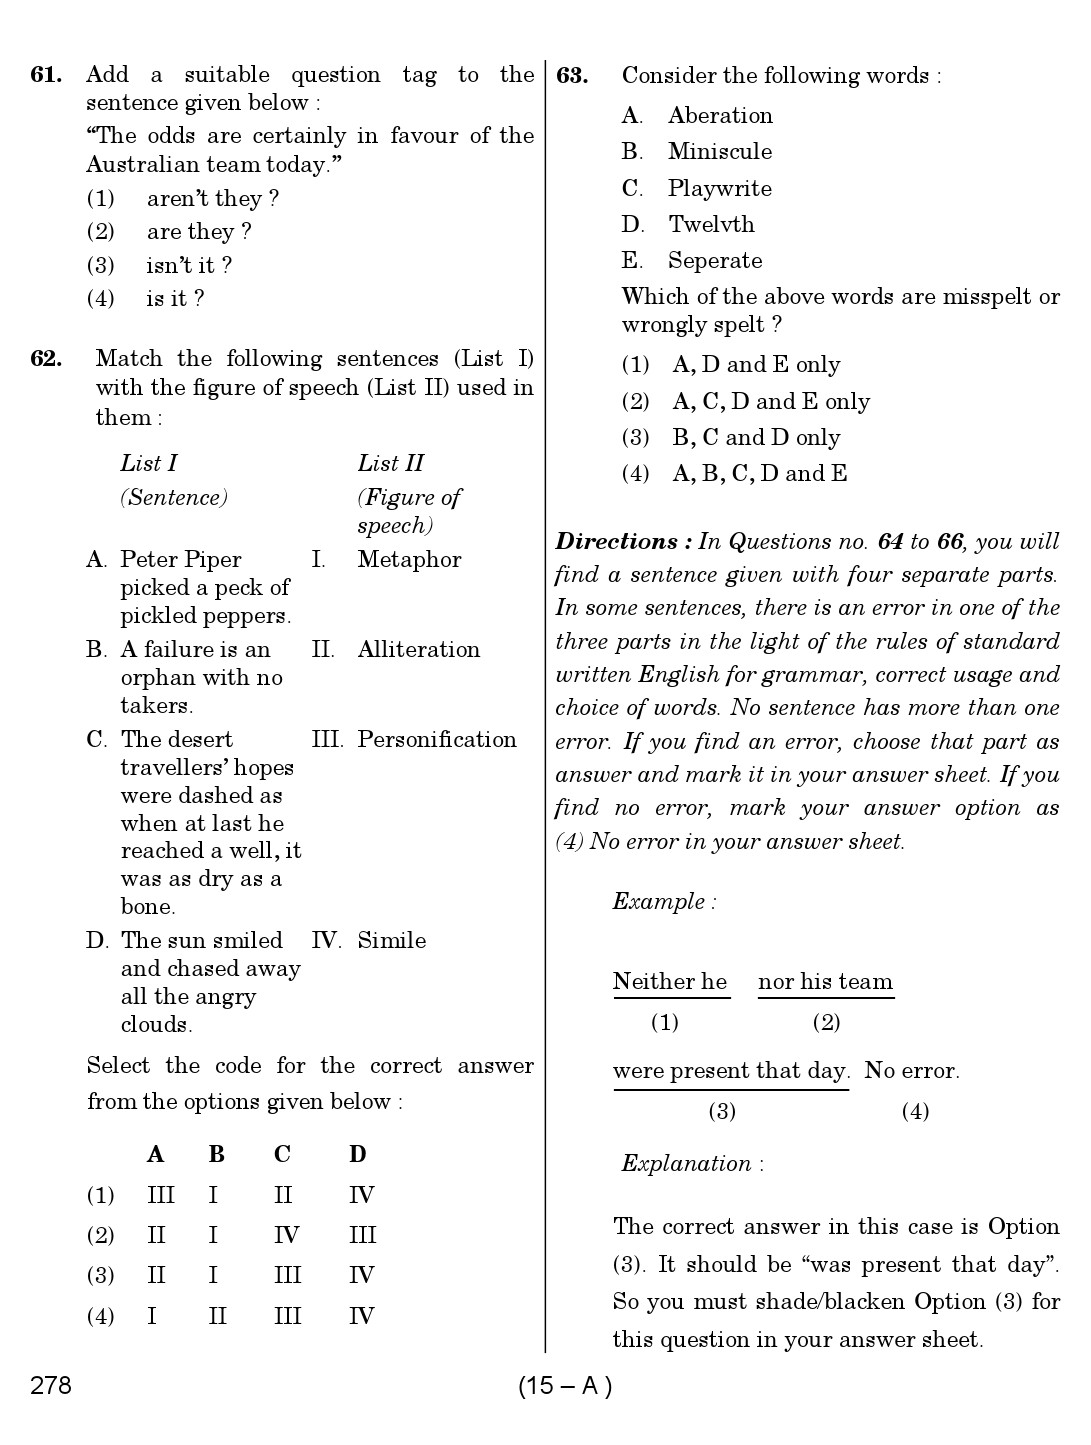 Karnataka PSC First Division Computer Assistants Exam Sample Question Paper 278 15